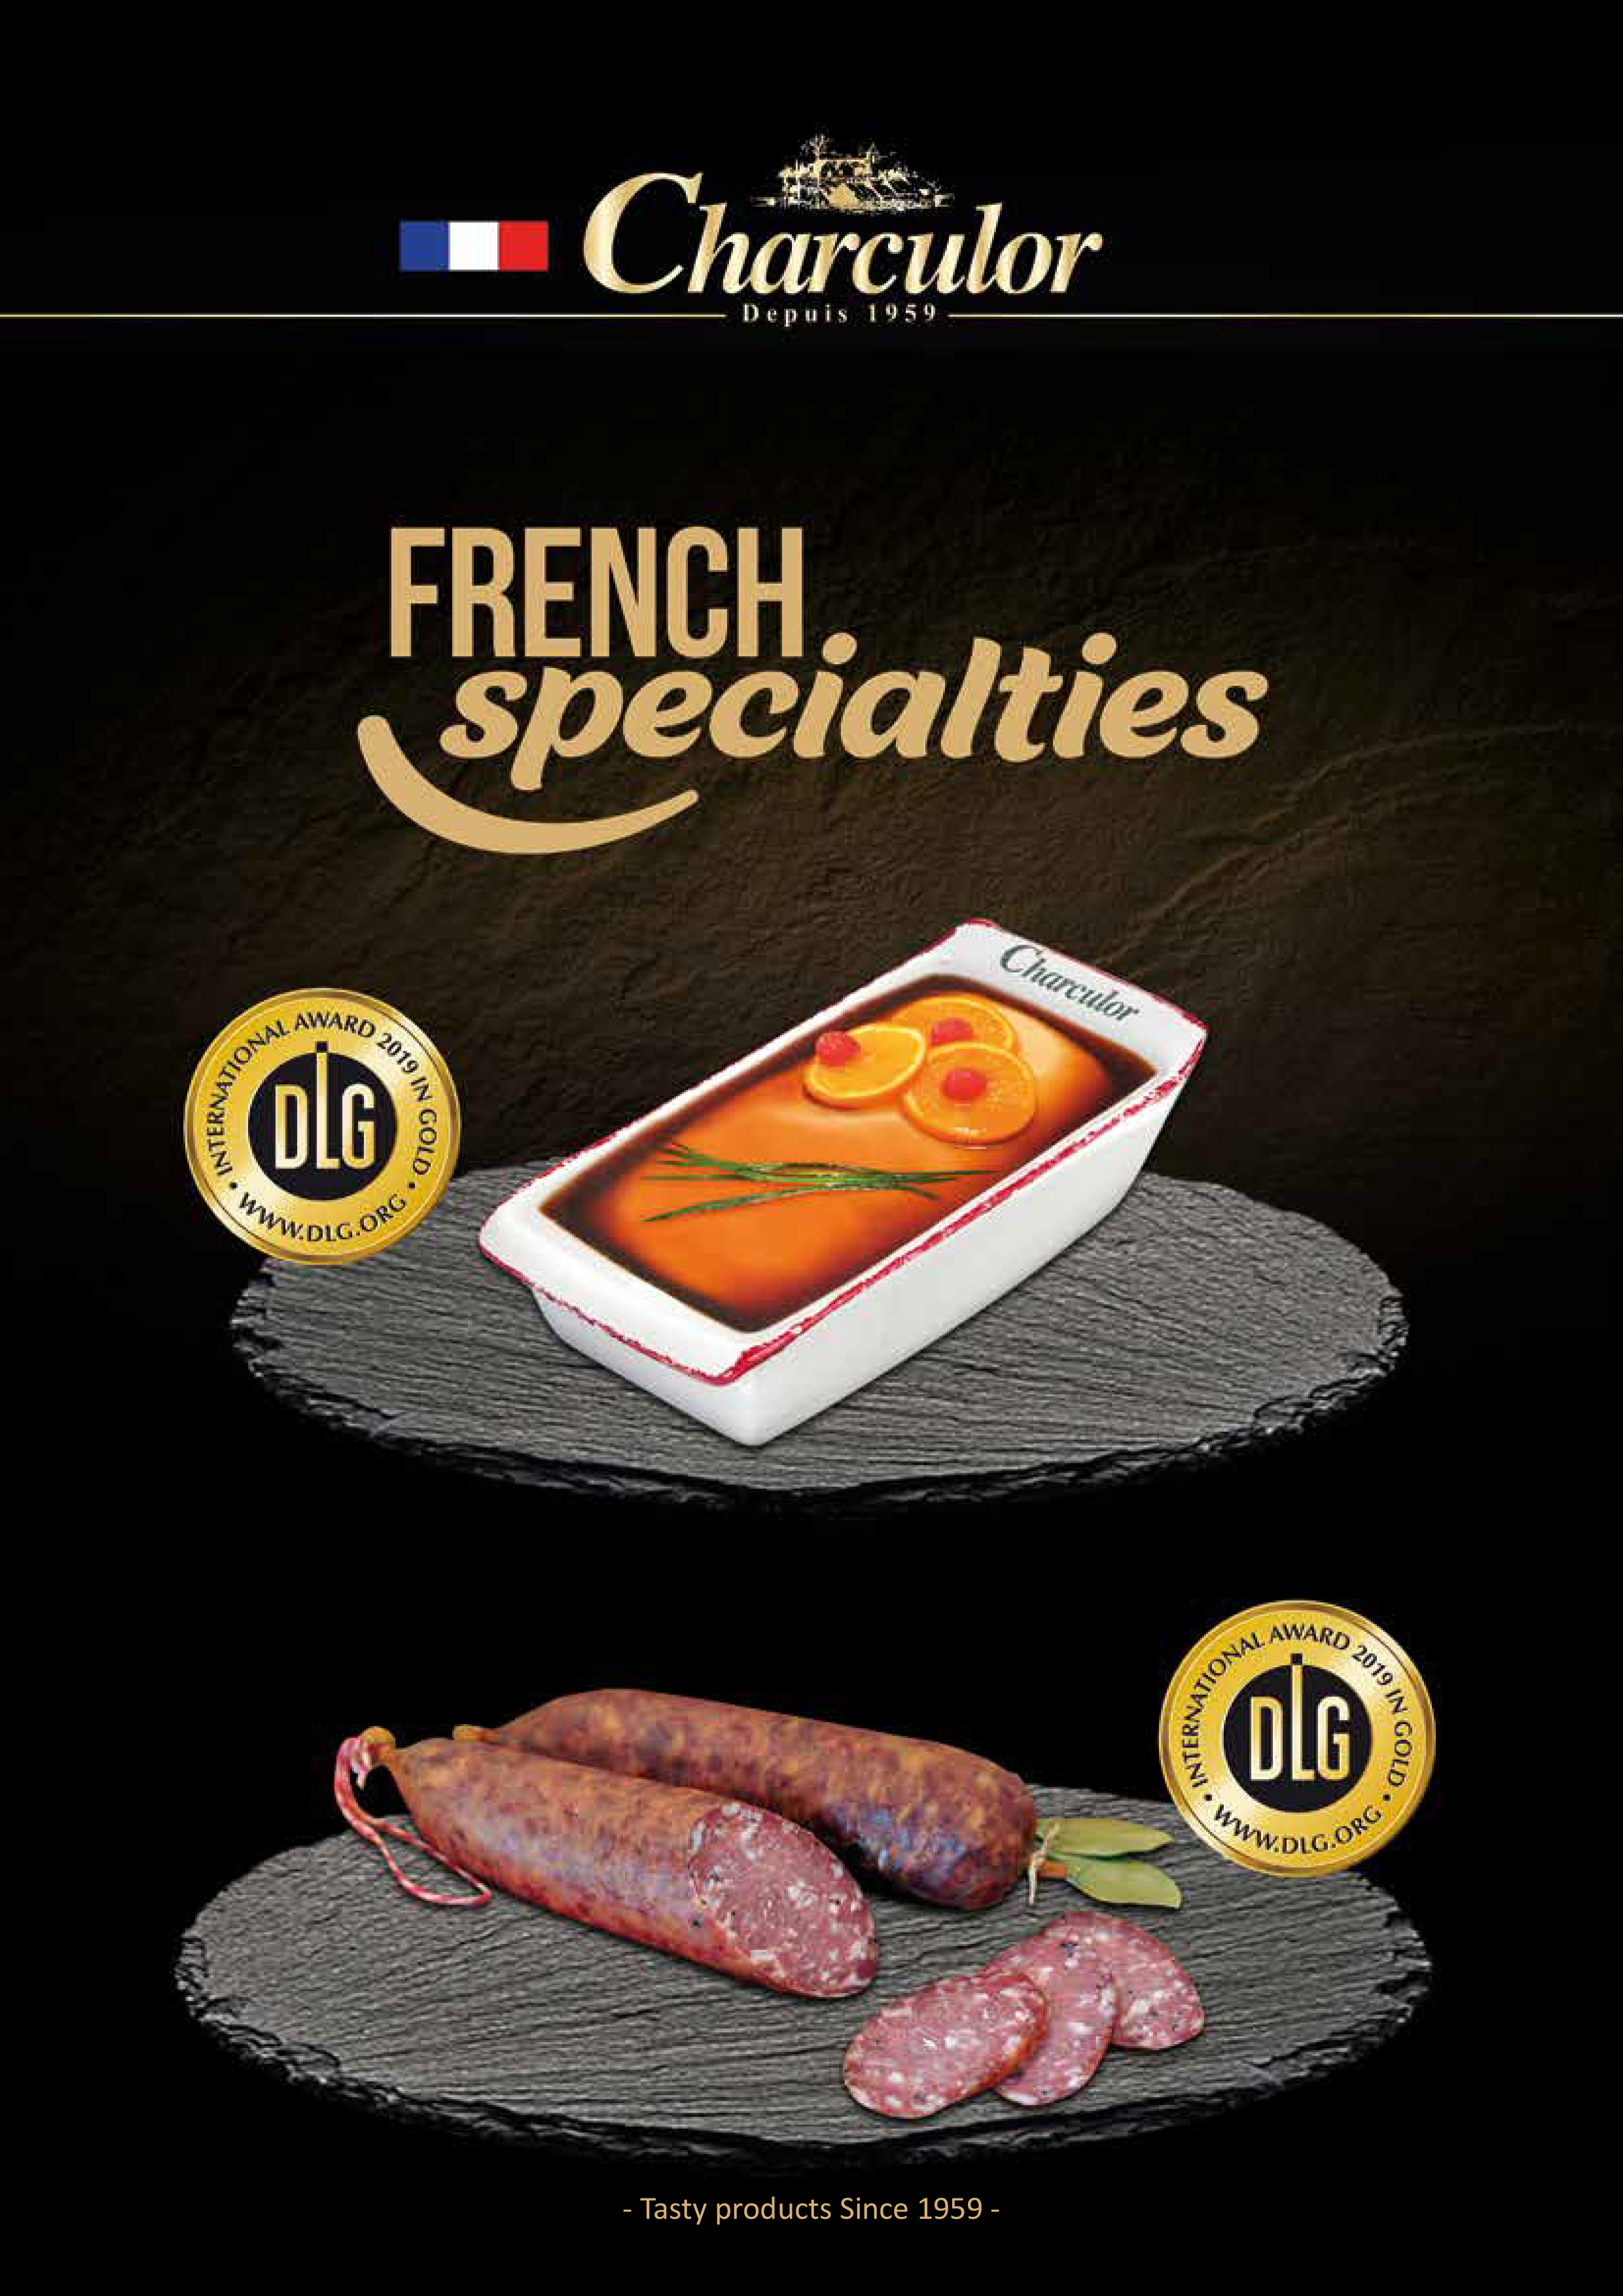 FRENCH-SPECIALTIES